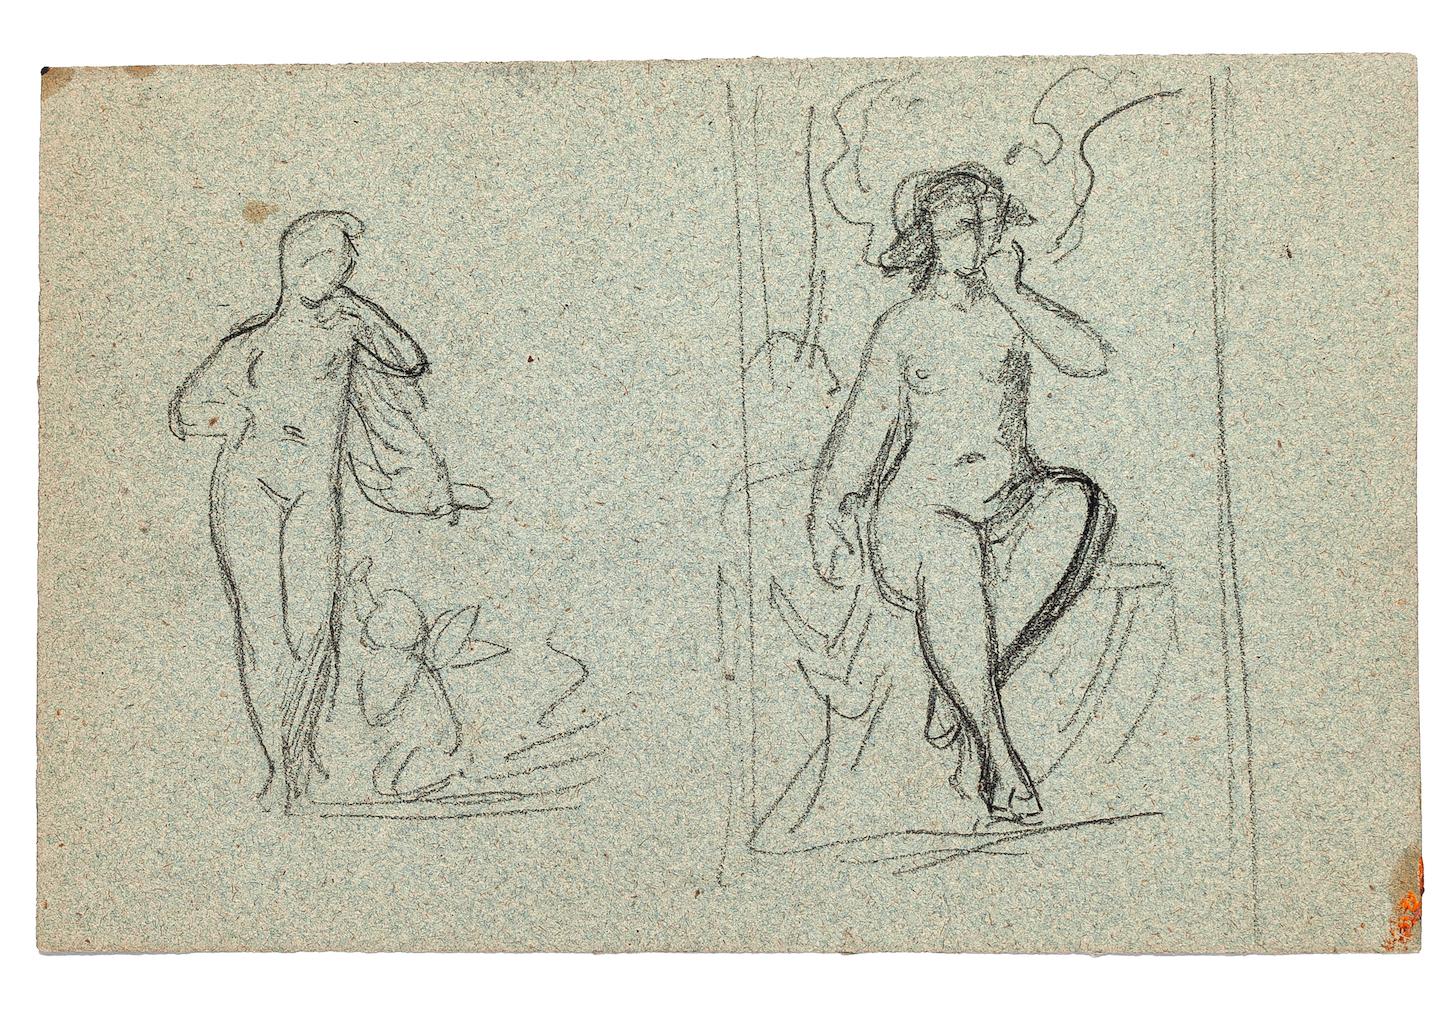 Unknown Figurative Art - Figures - Original Drawing in Pencil - Early 20th Century